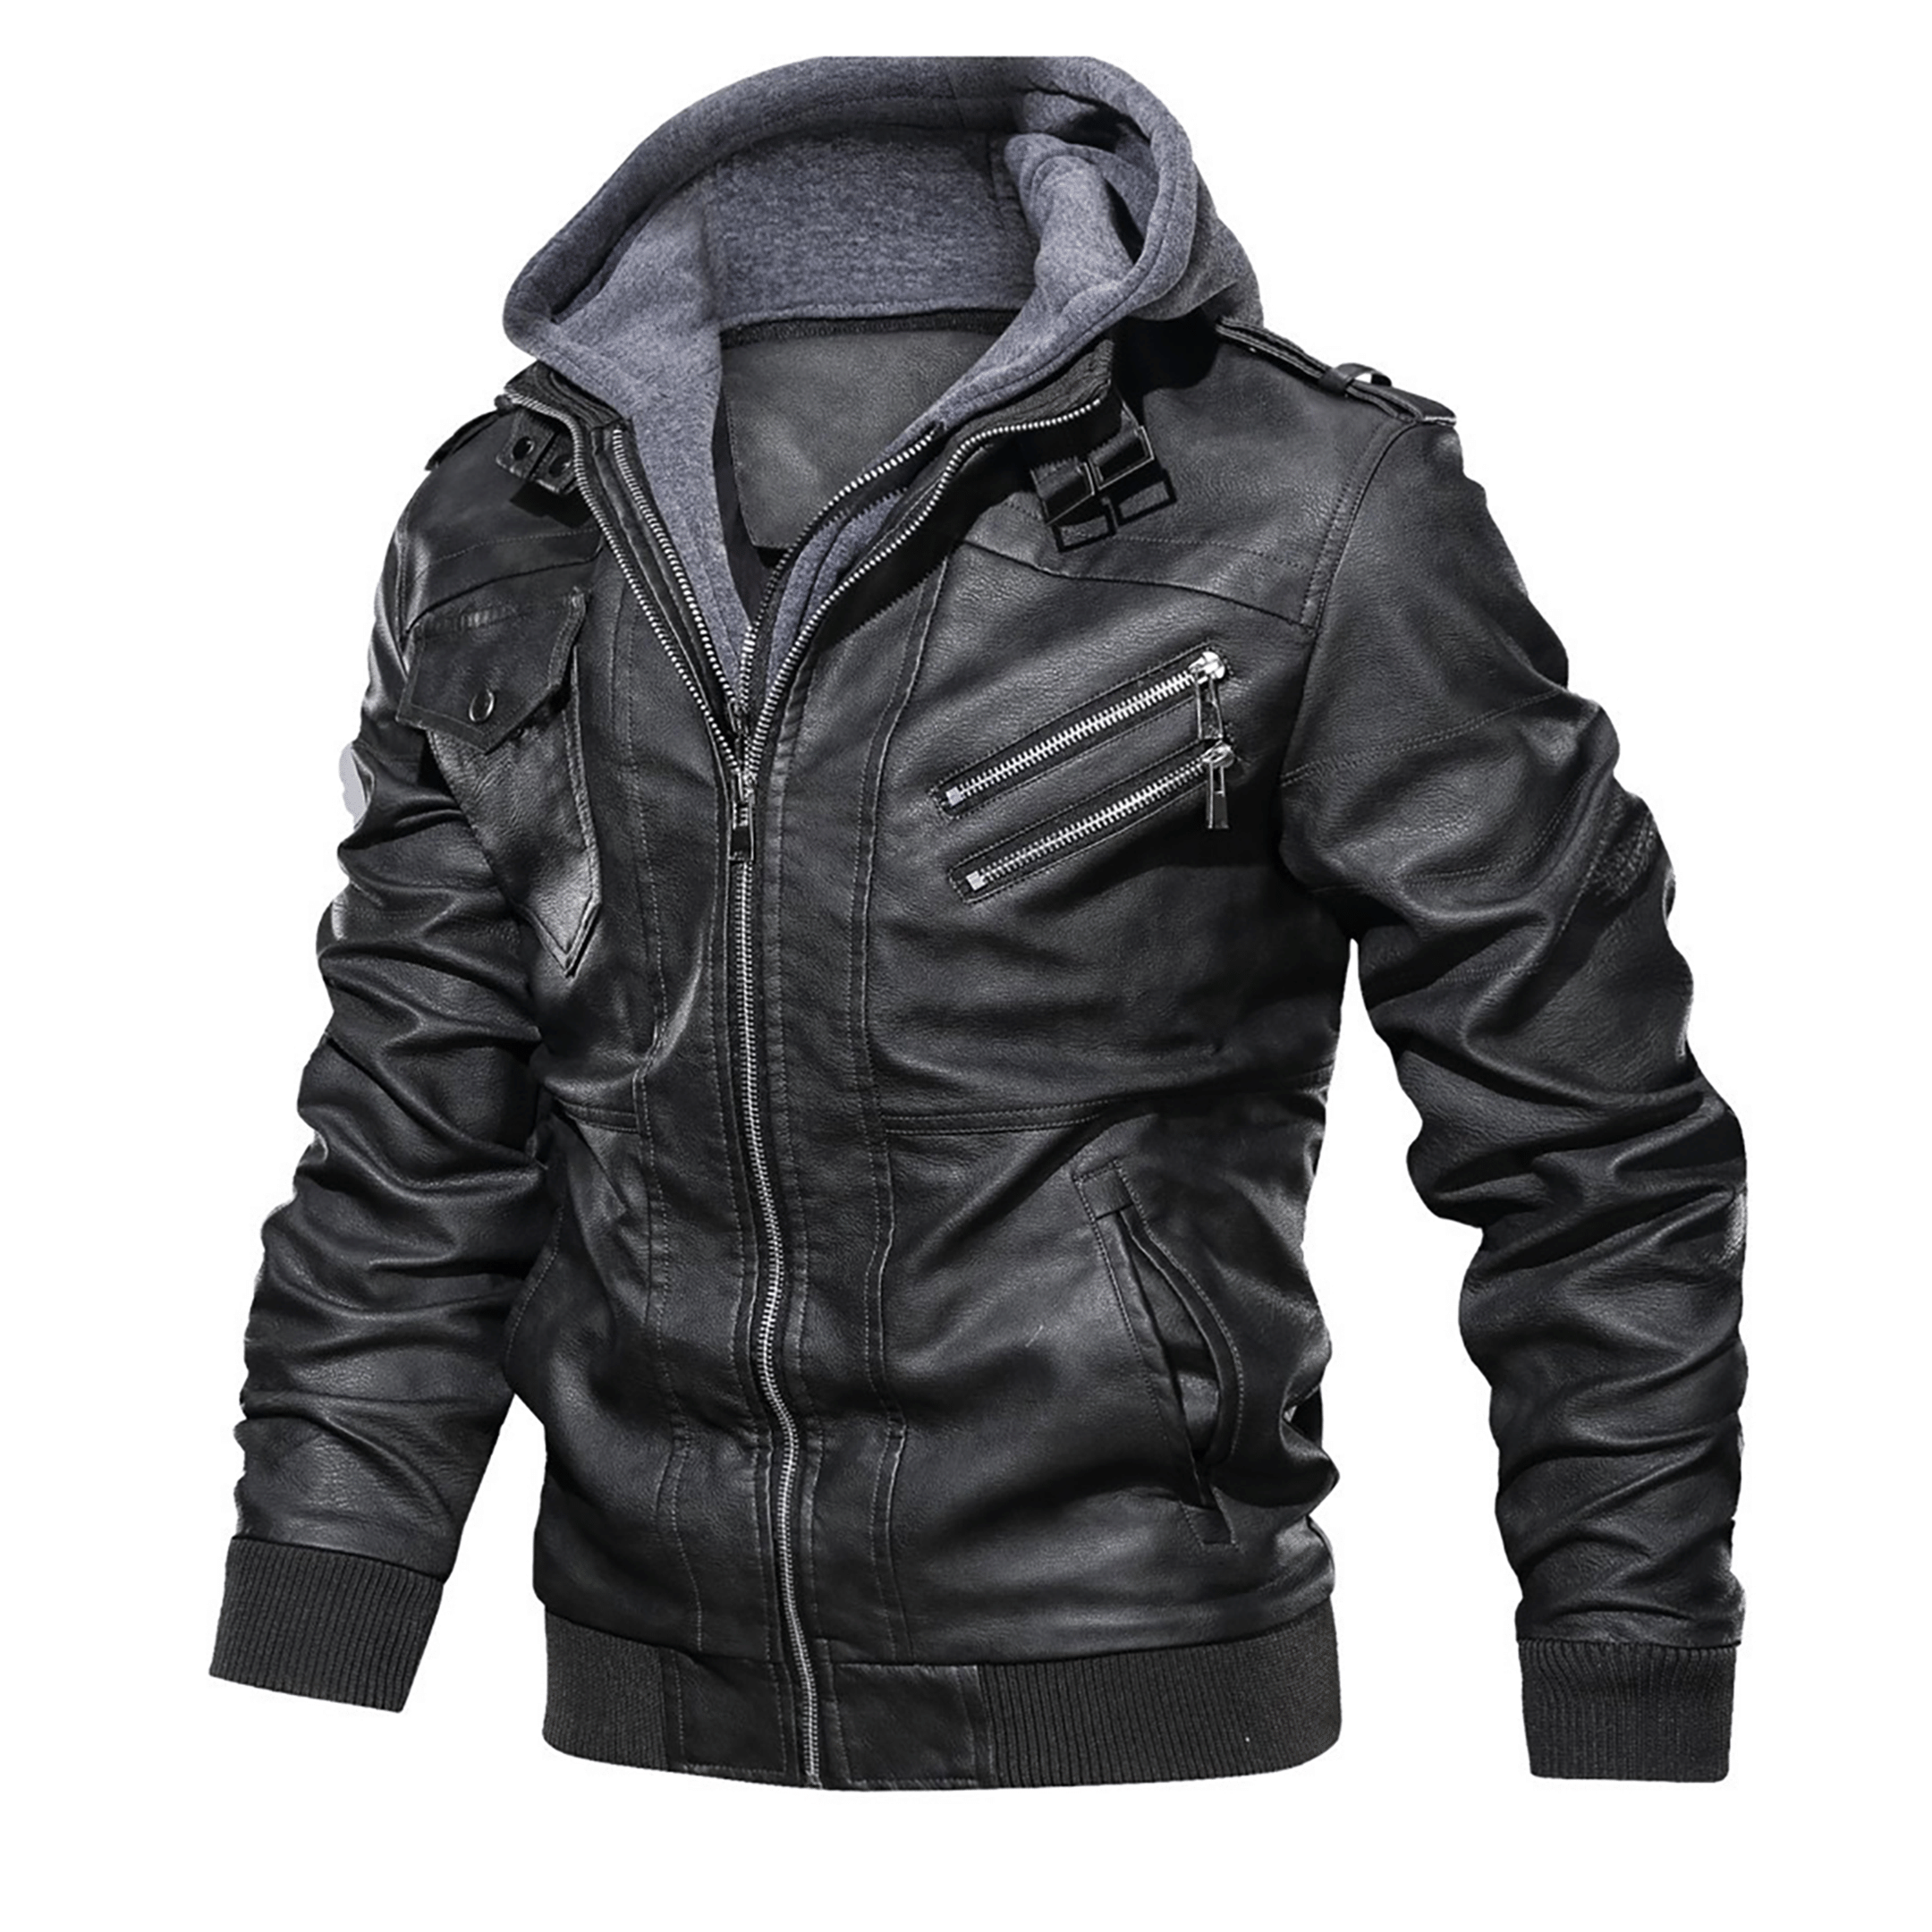 Top leather jackets and latest products 223